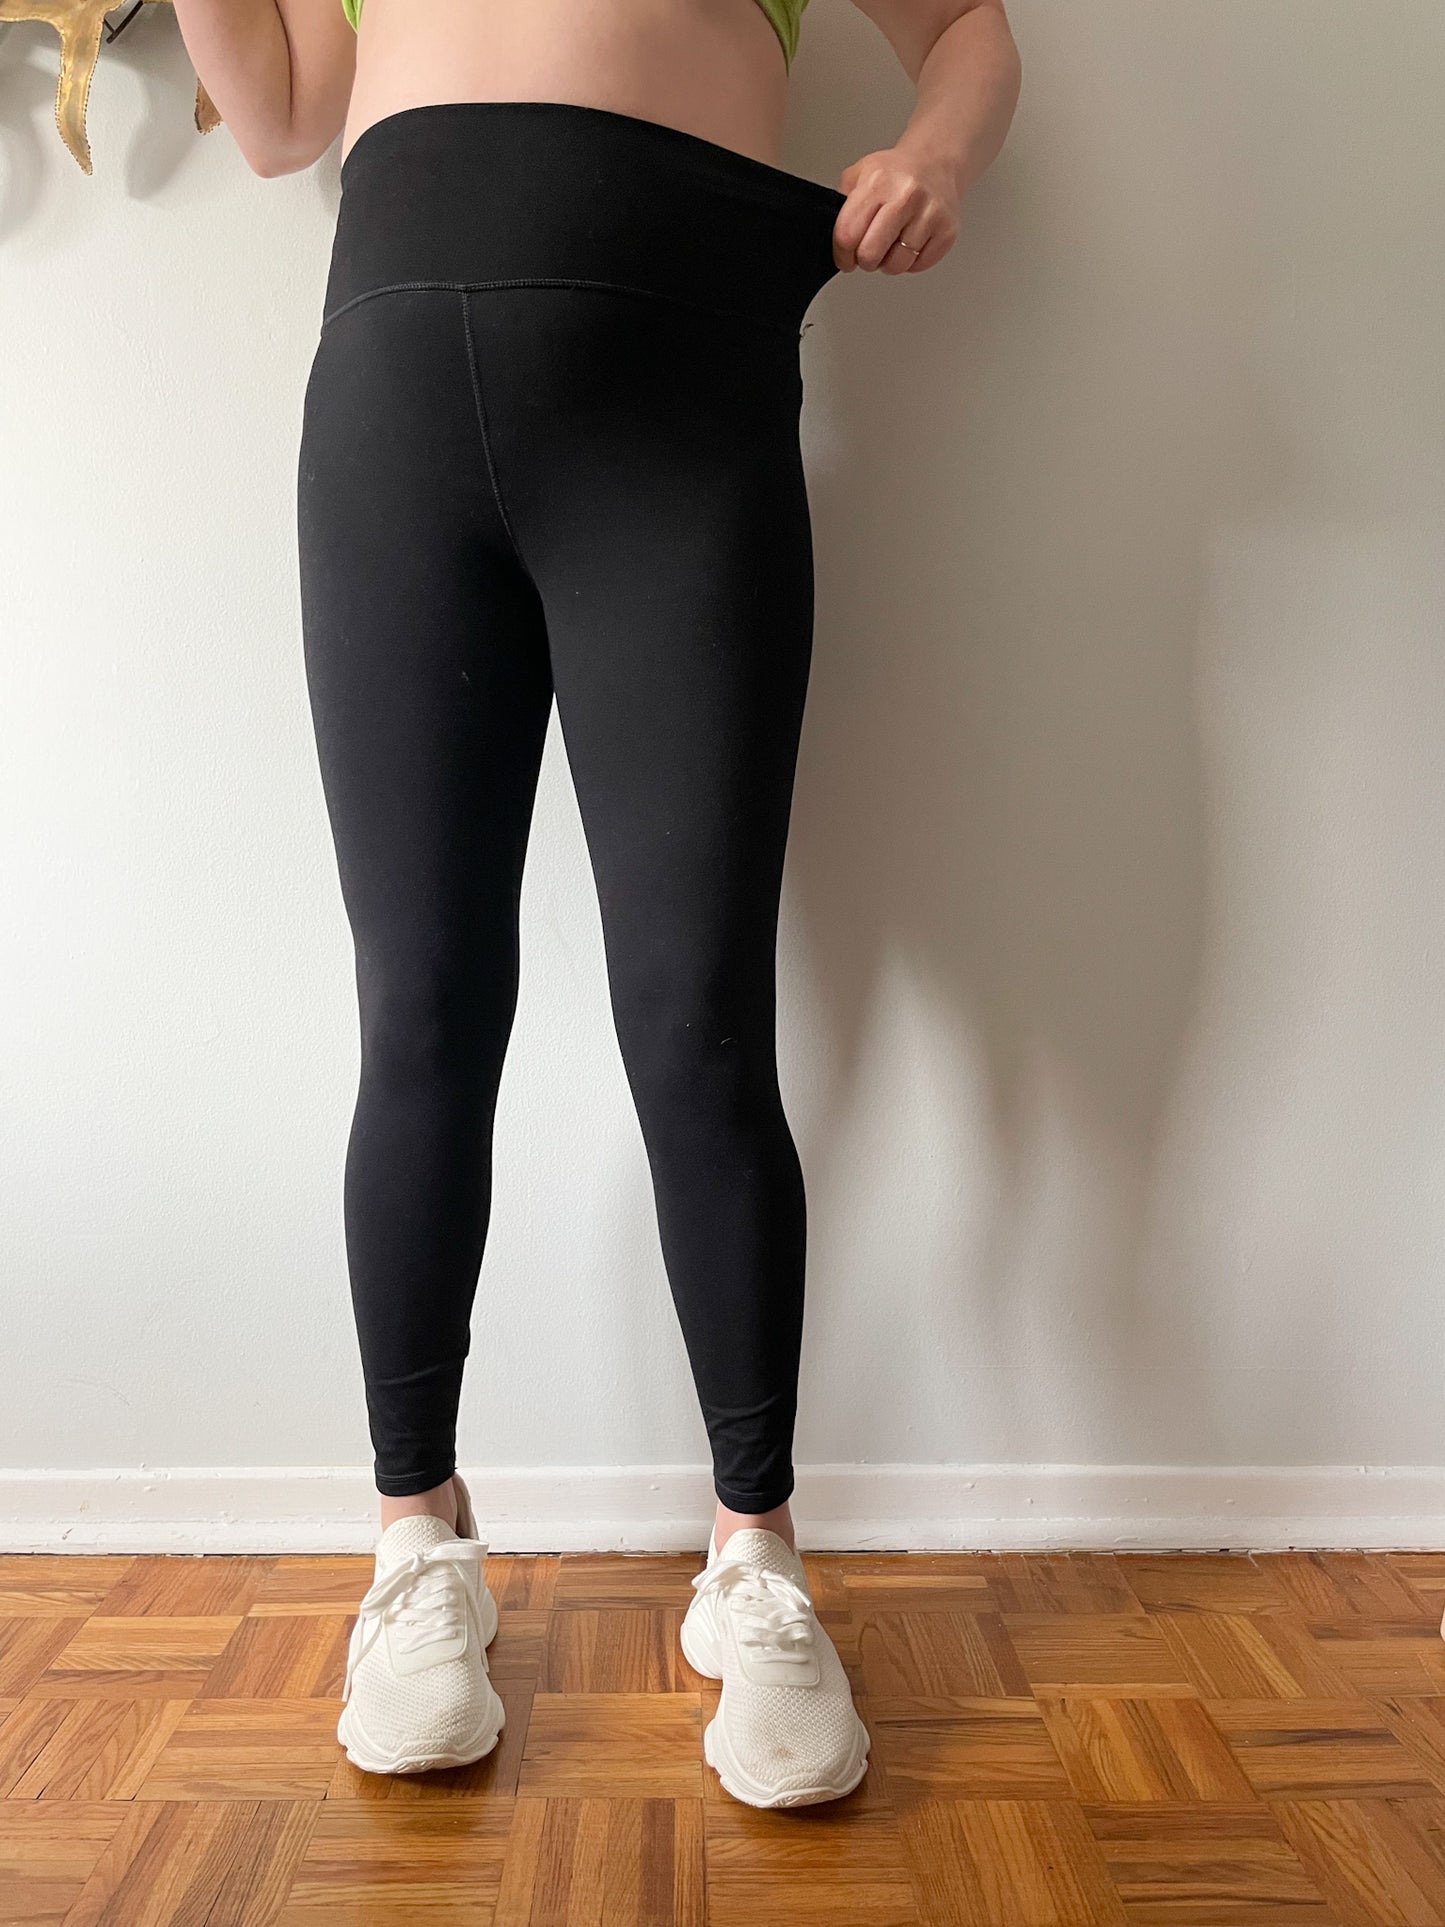 Fabletics Define PowerHold® Black High-Waisted Leggings - S/M – Le Prix  Fashion & Consulting